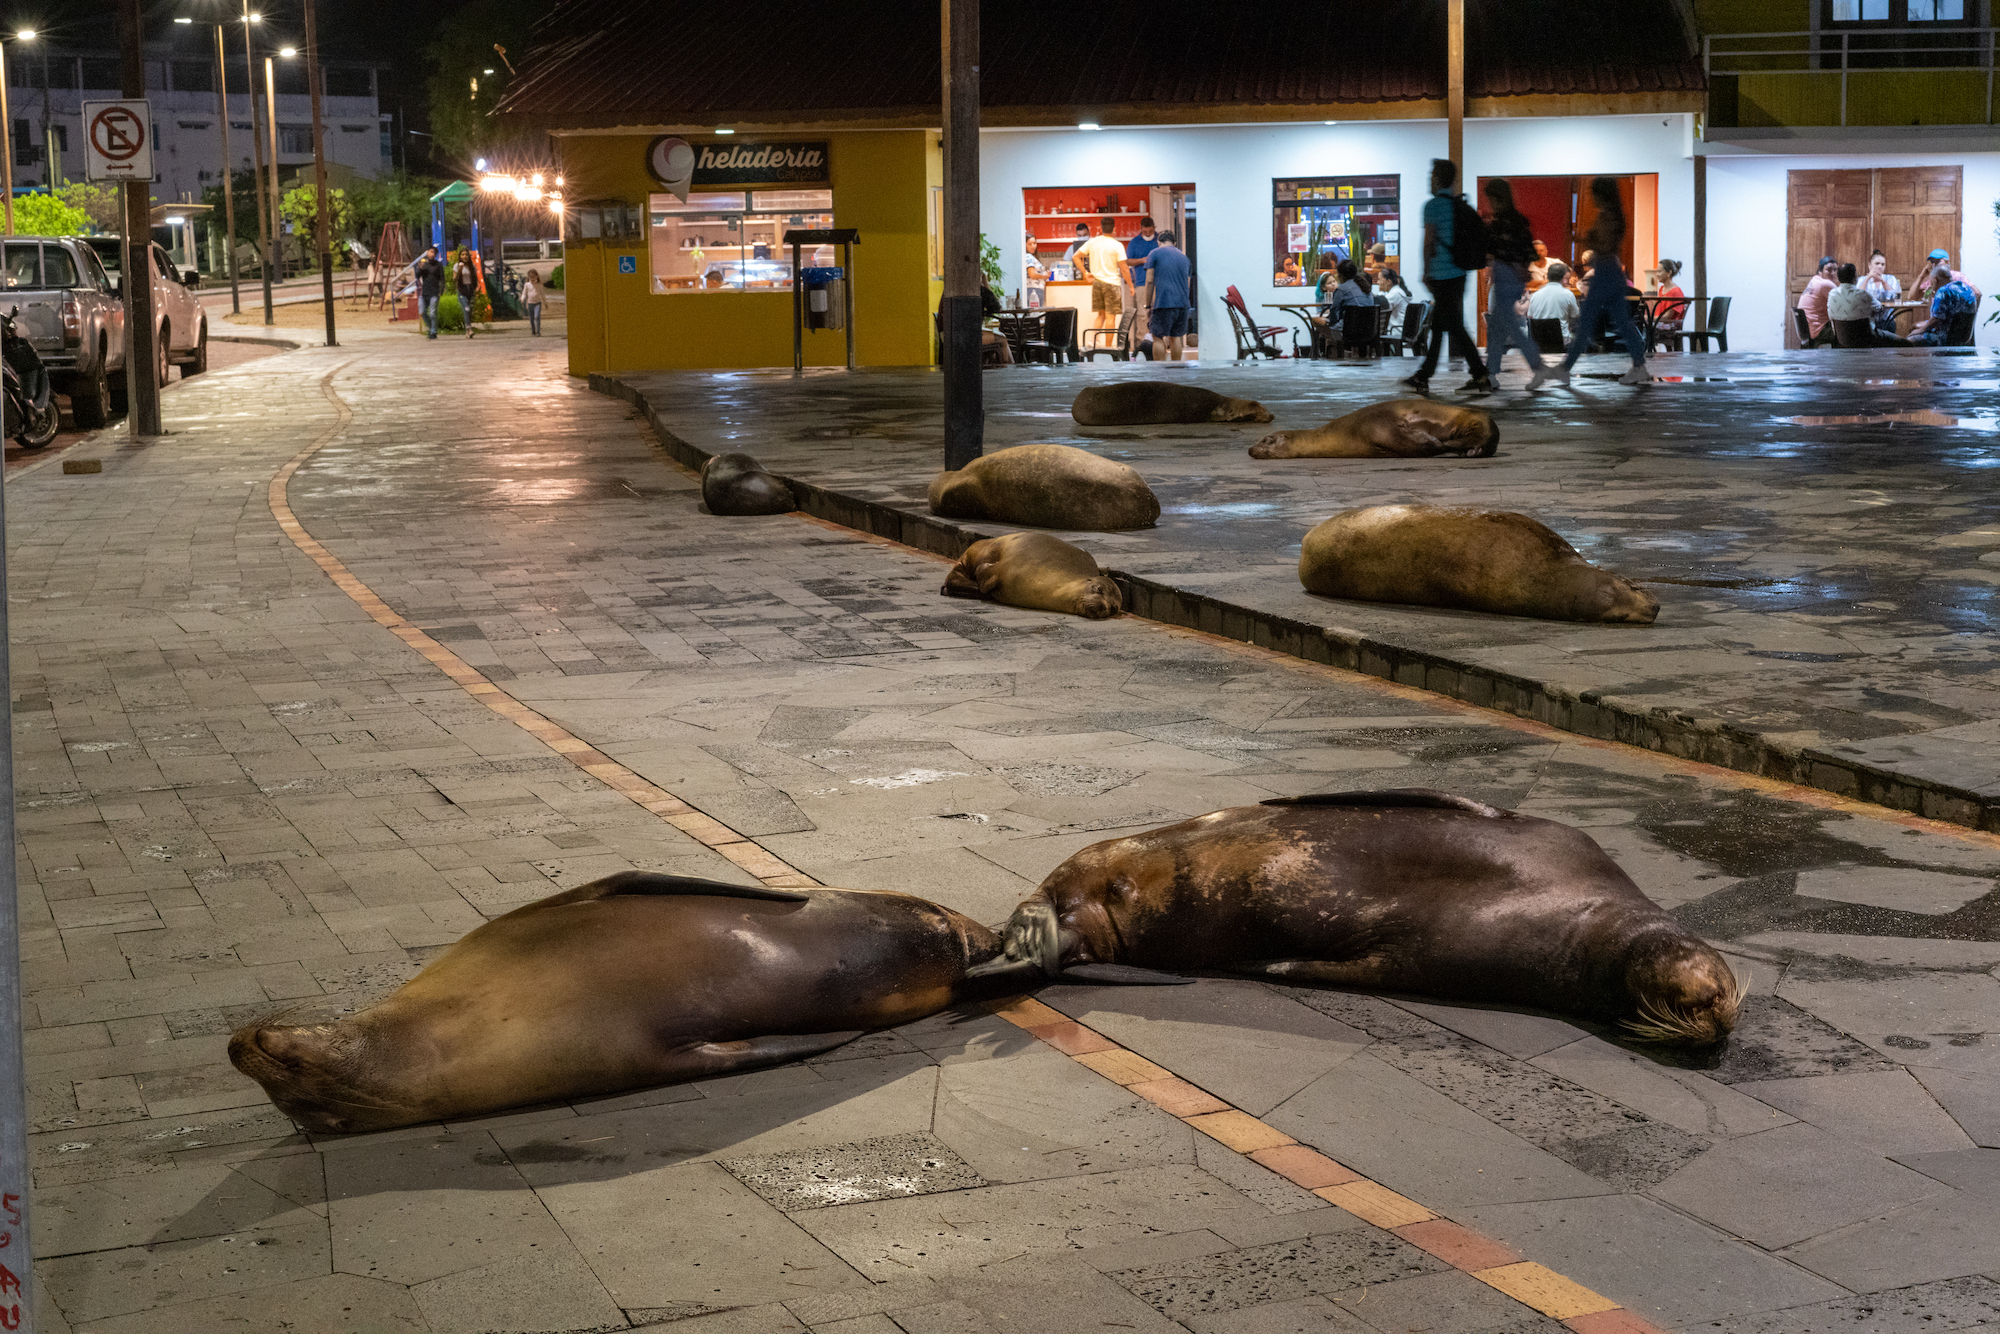 Sea lions rest on pavement in an urban area with people sitting at tables nearby